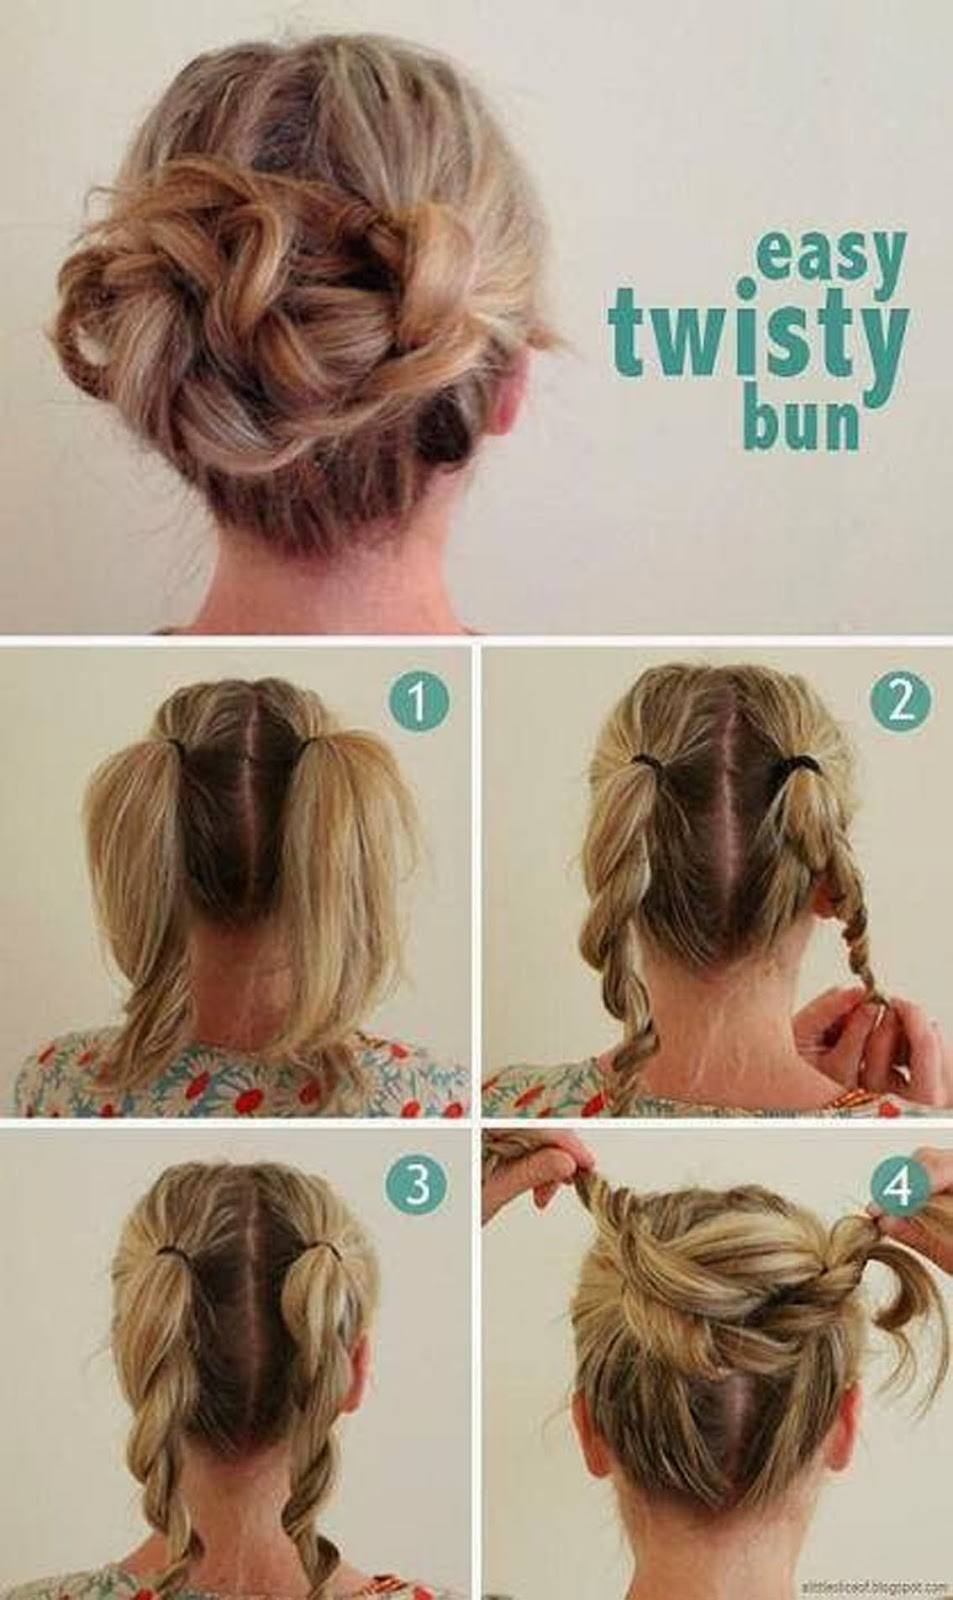 25 Five Minute Or Less Hairstyles That'll Save You From Busy Mornings